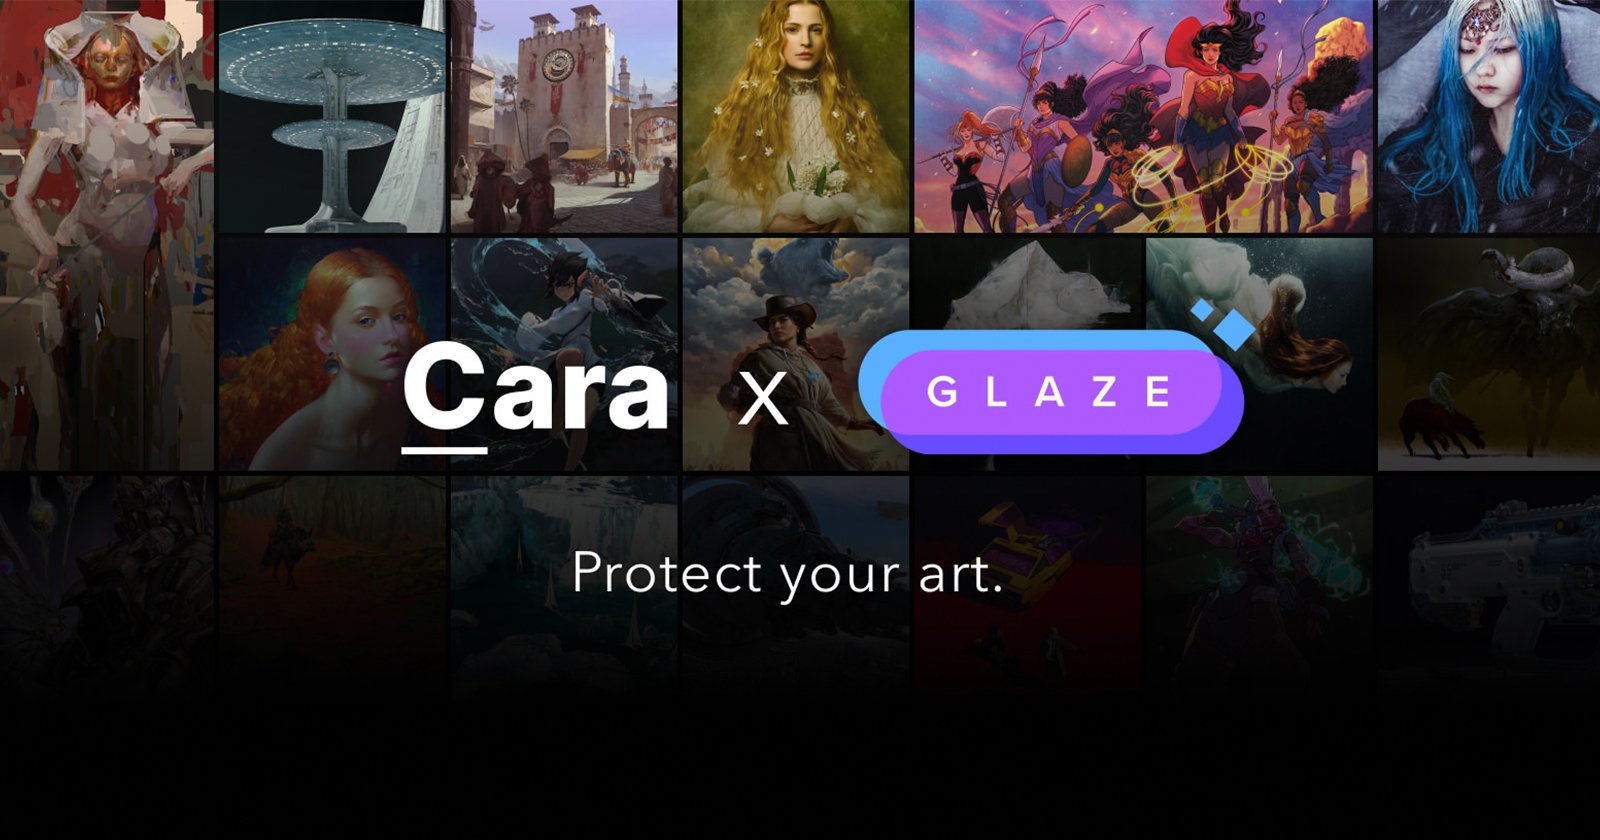  cara glaze integration provides artists protection against scraping 